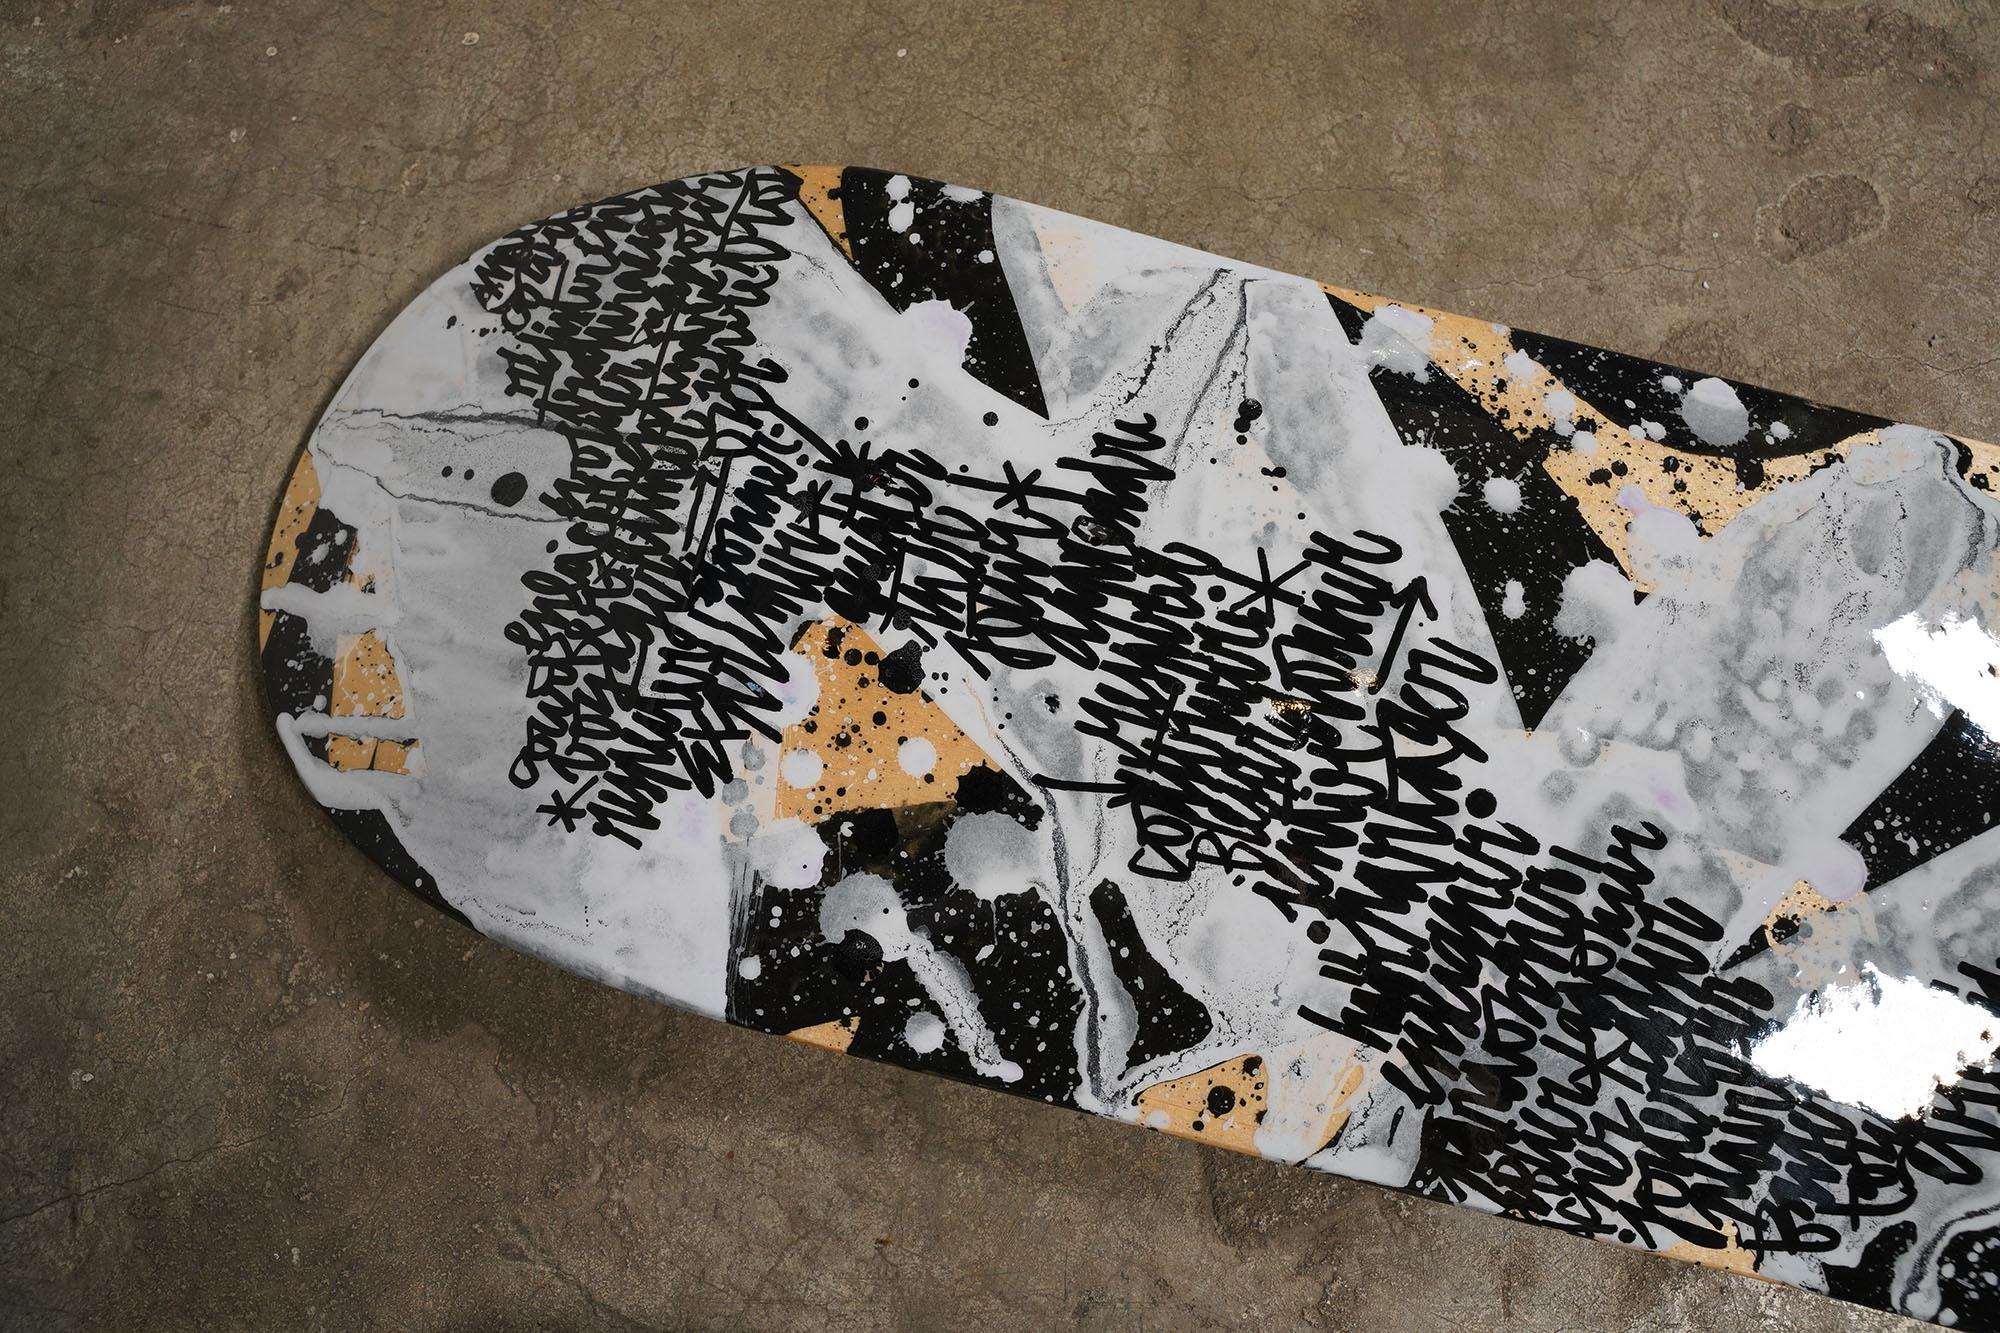 Skate 01 - Brown Abstract Painting by Denis Meyers